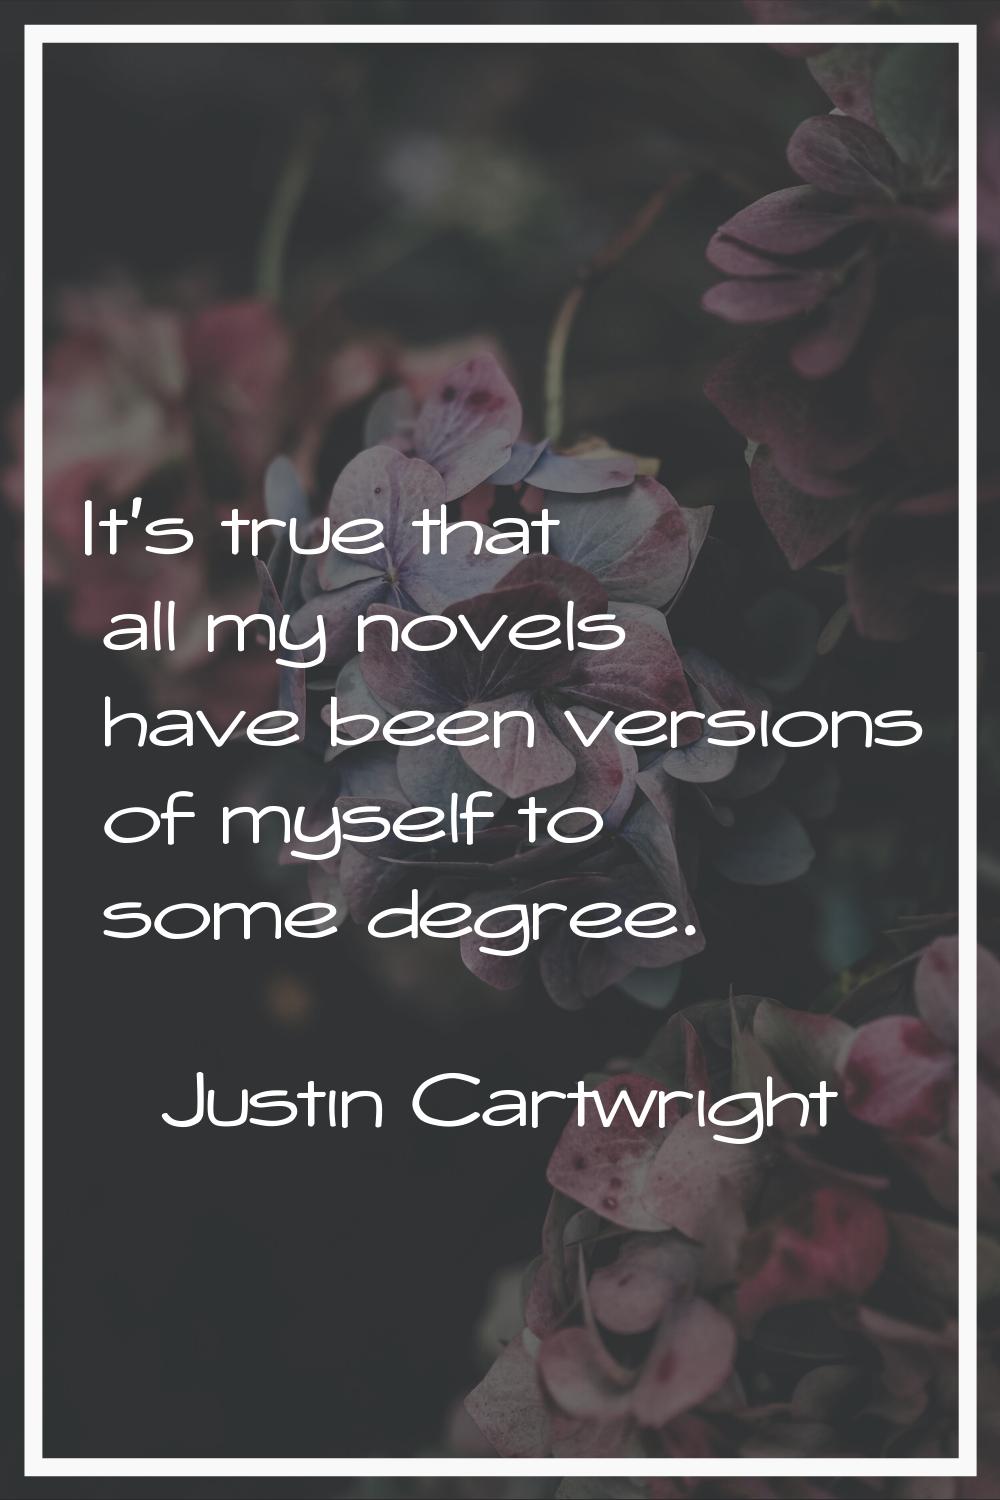 It's true that all my novels have been versions of myself to some degree.